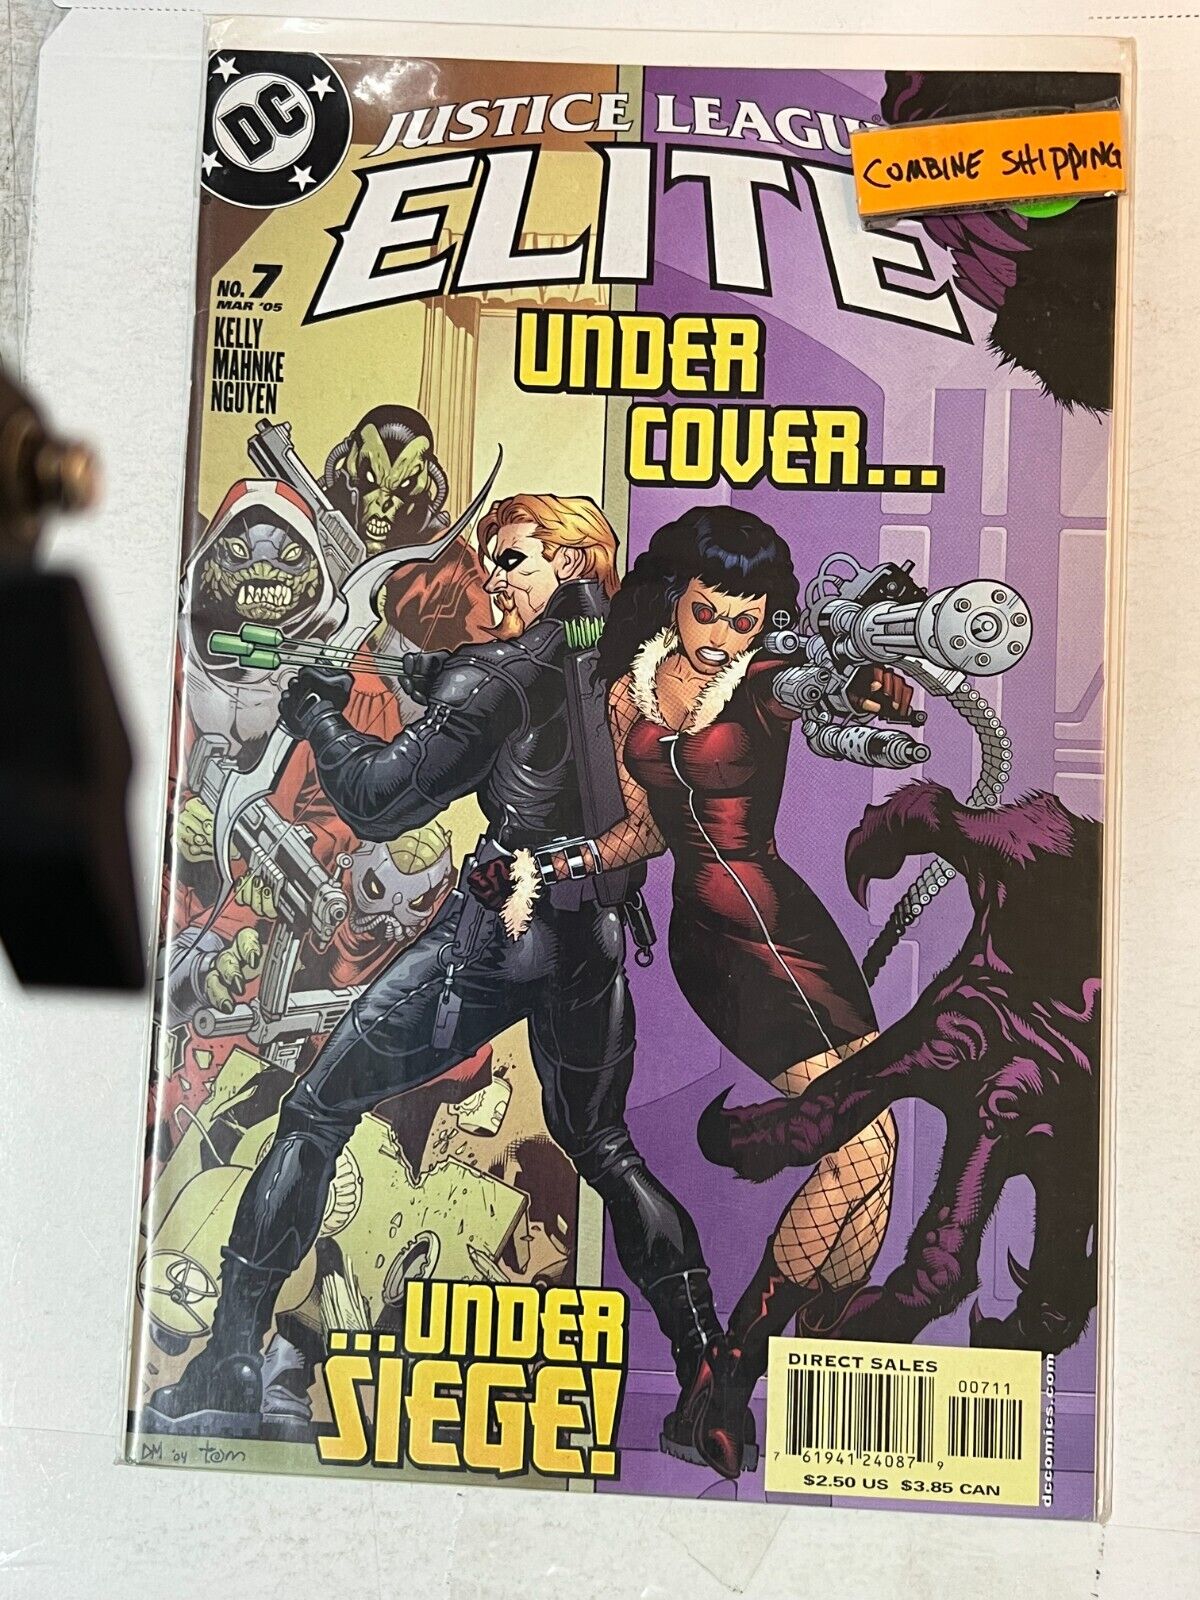 justce league elite #7 under cover 2005 dc comics | Combined Shipping B&B